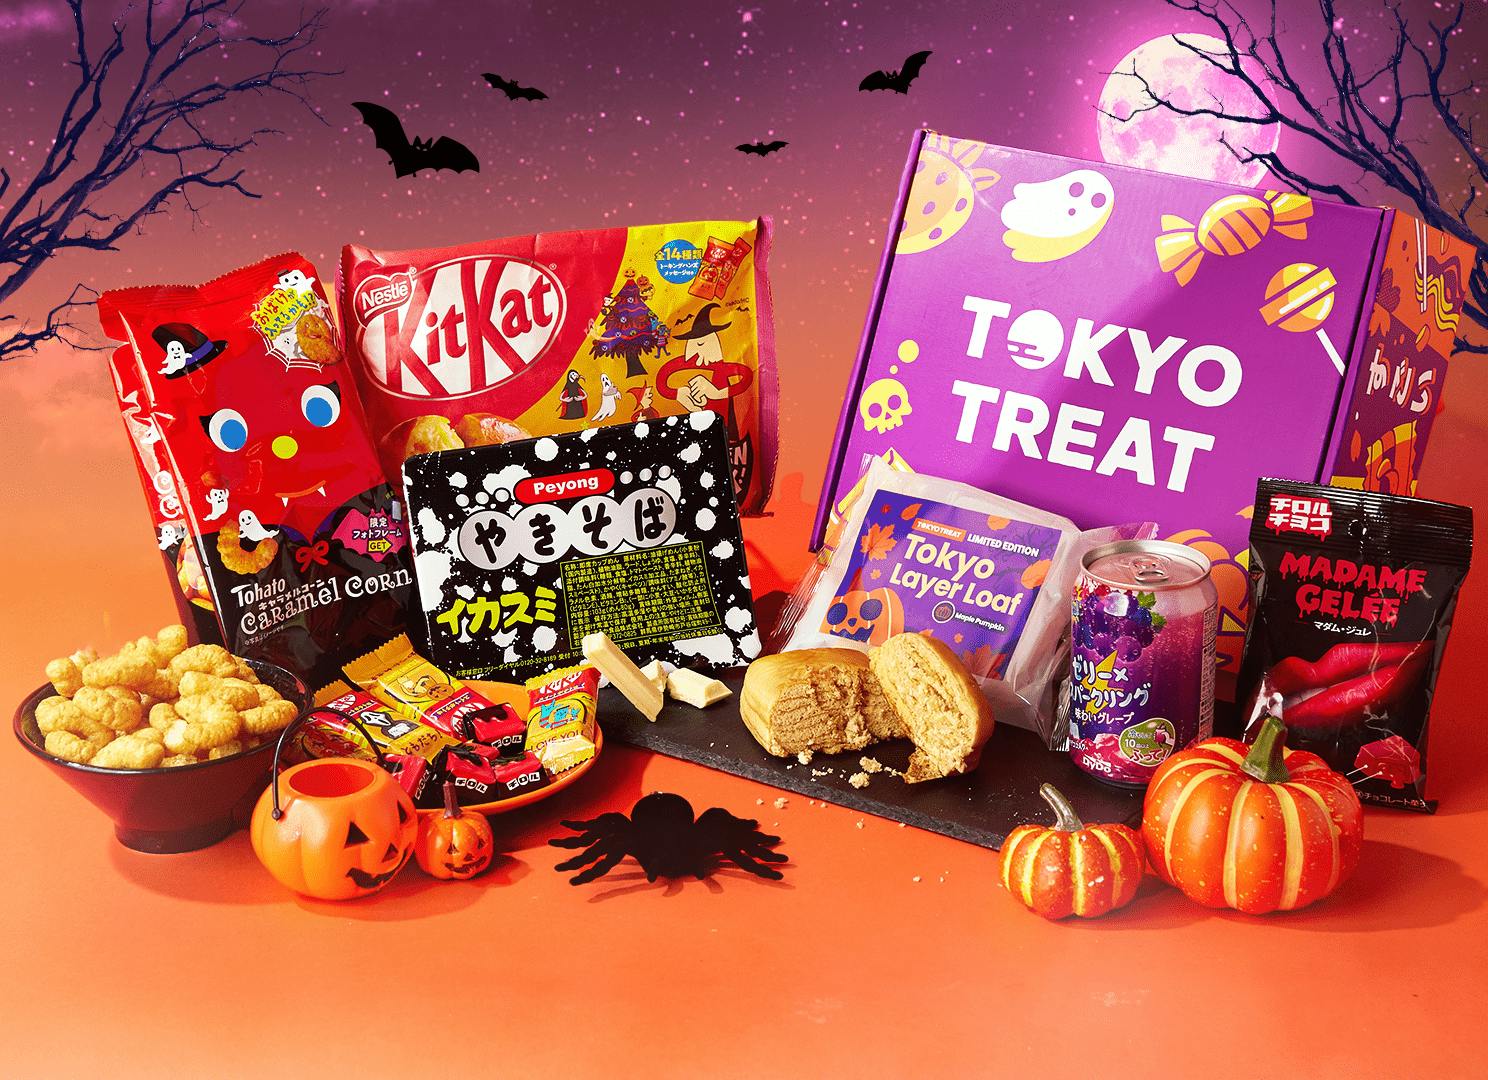 TokyoTreat’s October Halloween subscription box with Japanese sweets, snacks, instant noodles, and soda.